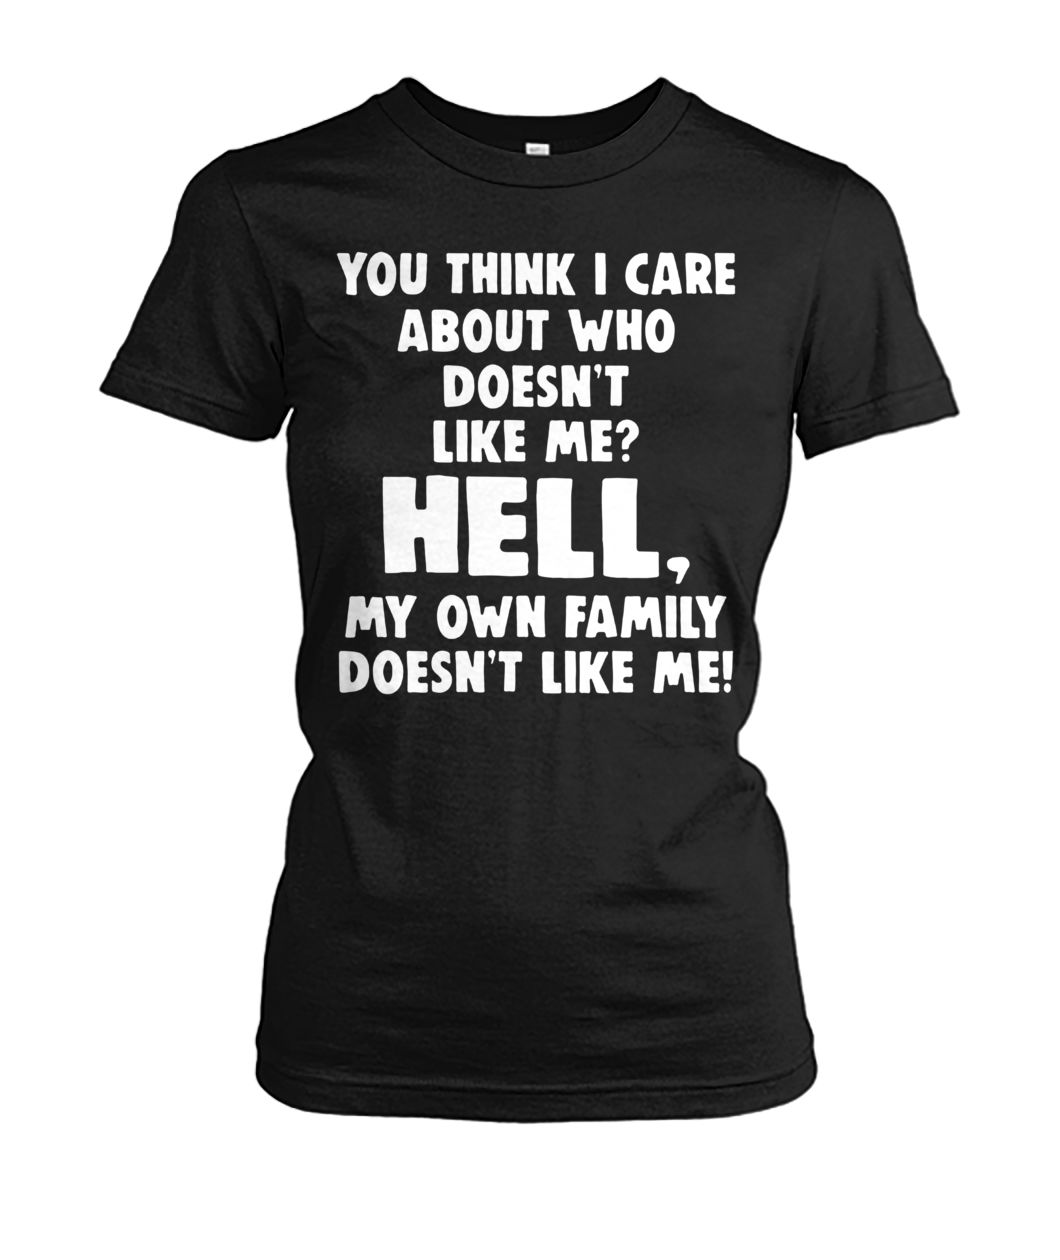 You think I care about who doesn't like me hell my own family doesn't like me women's crew tee